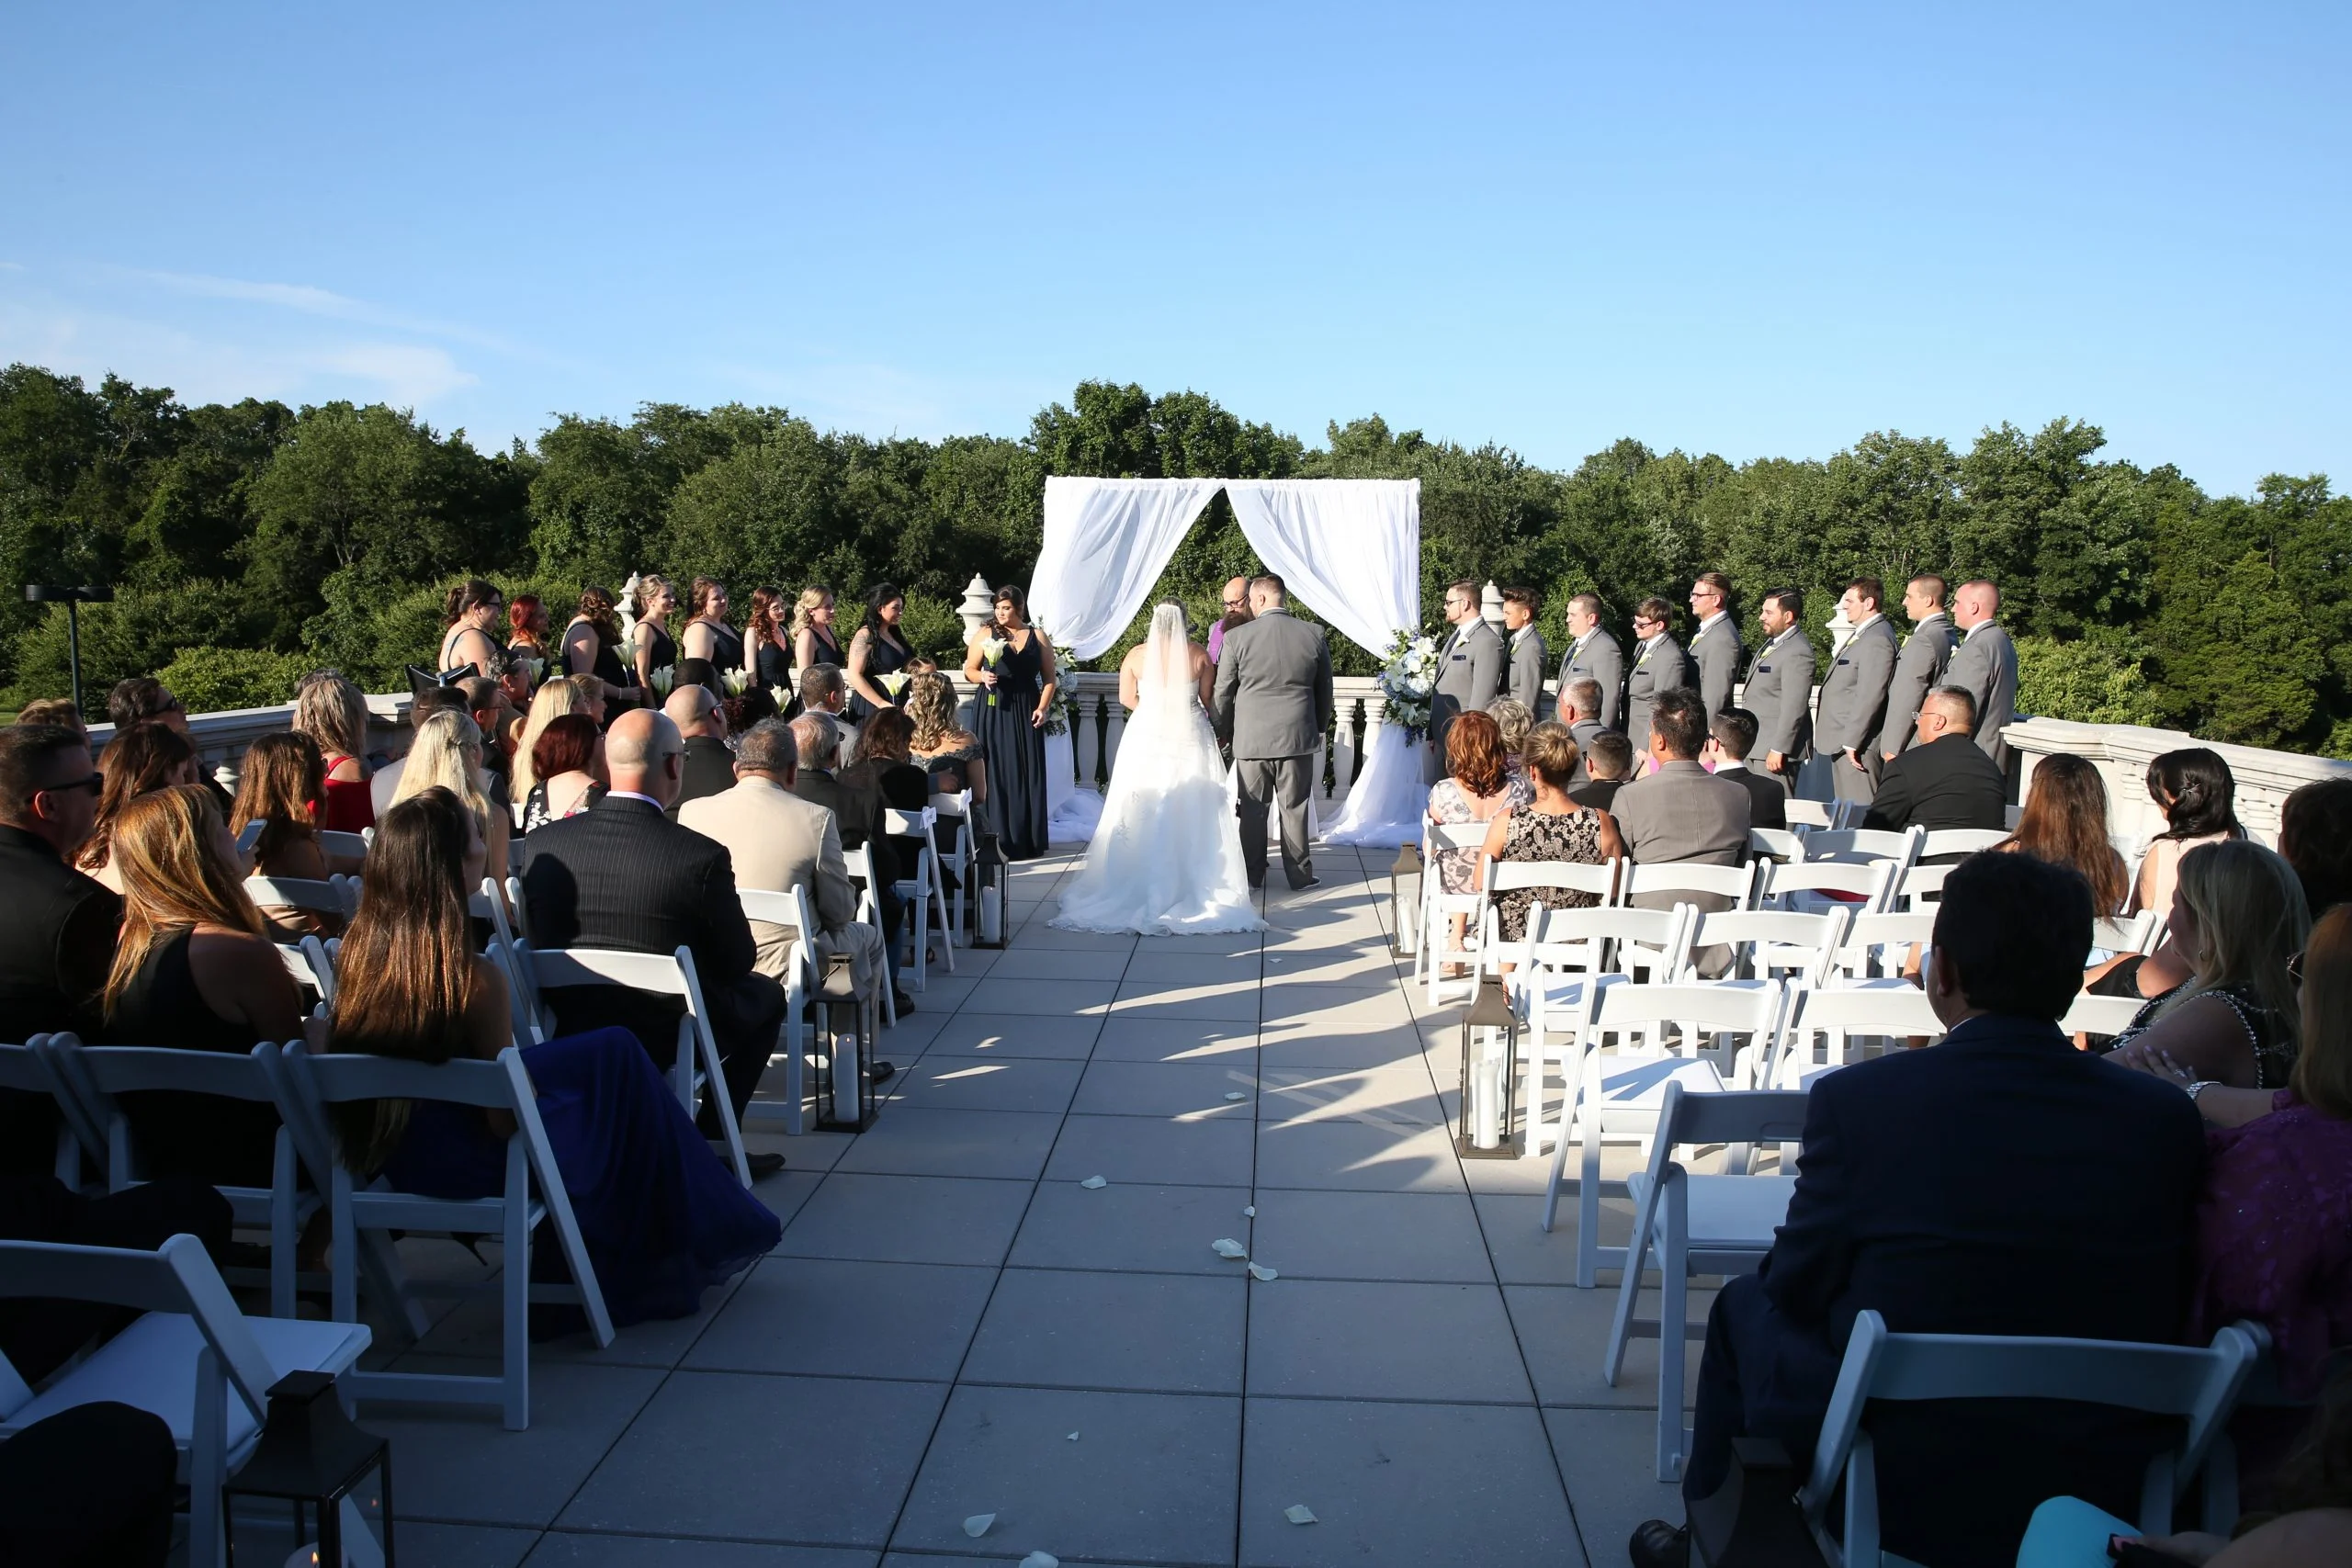 A wedding ceremony on the roof of a building.